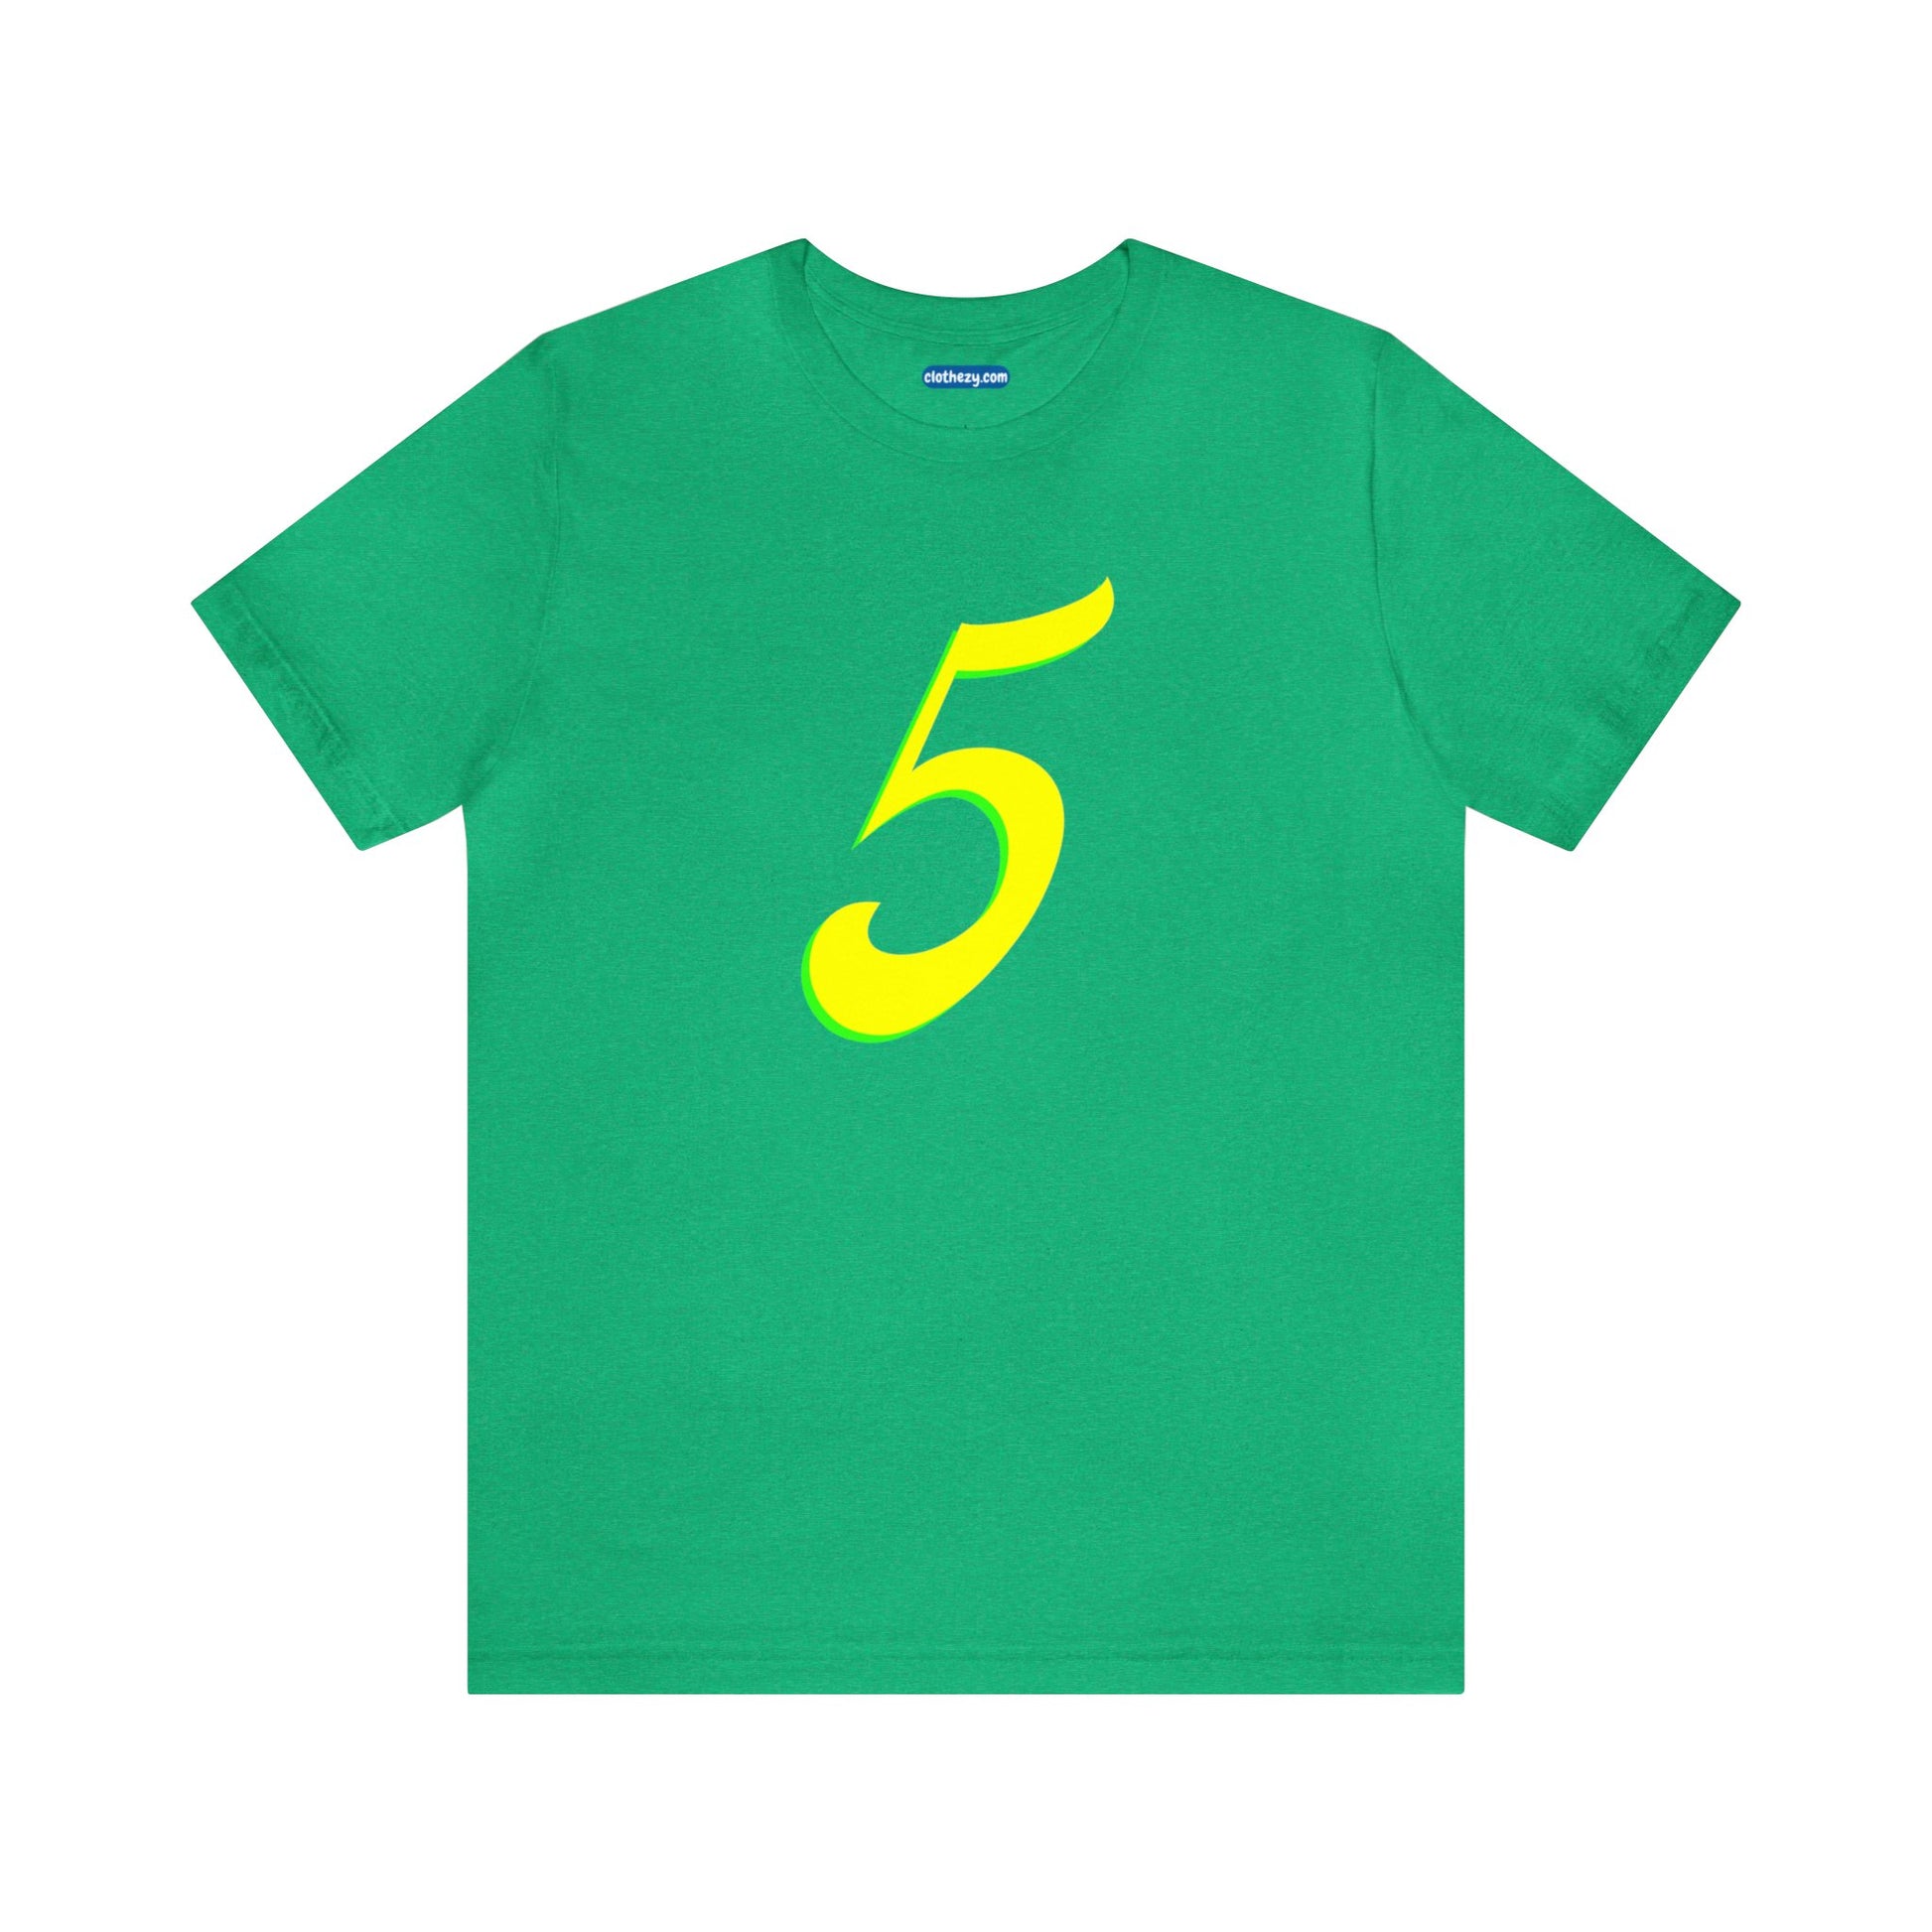 Number 5 Design - Soft Cotton Tee for birthdays and celebrations, Gift for friends and family, Multiple Options by clothezy.com in Green Heather Size Small - Buy Now